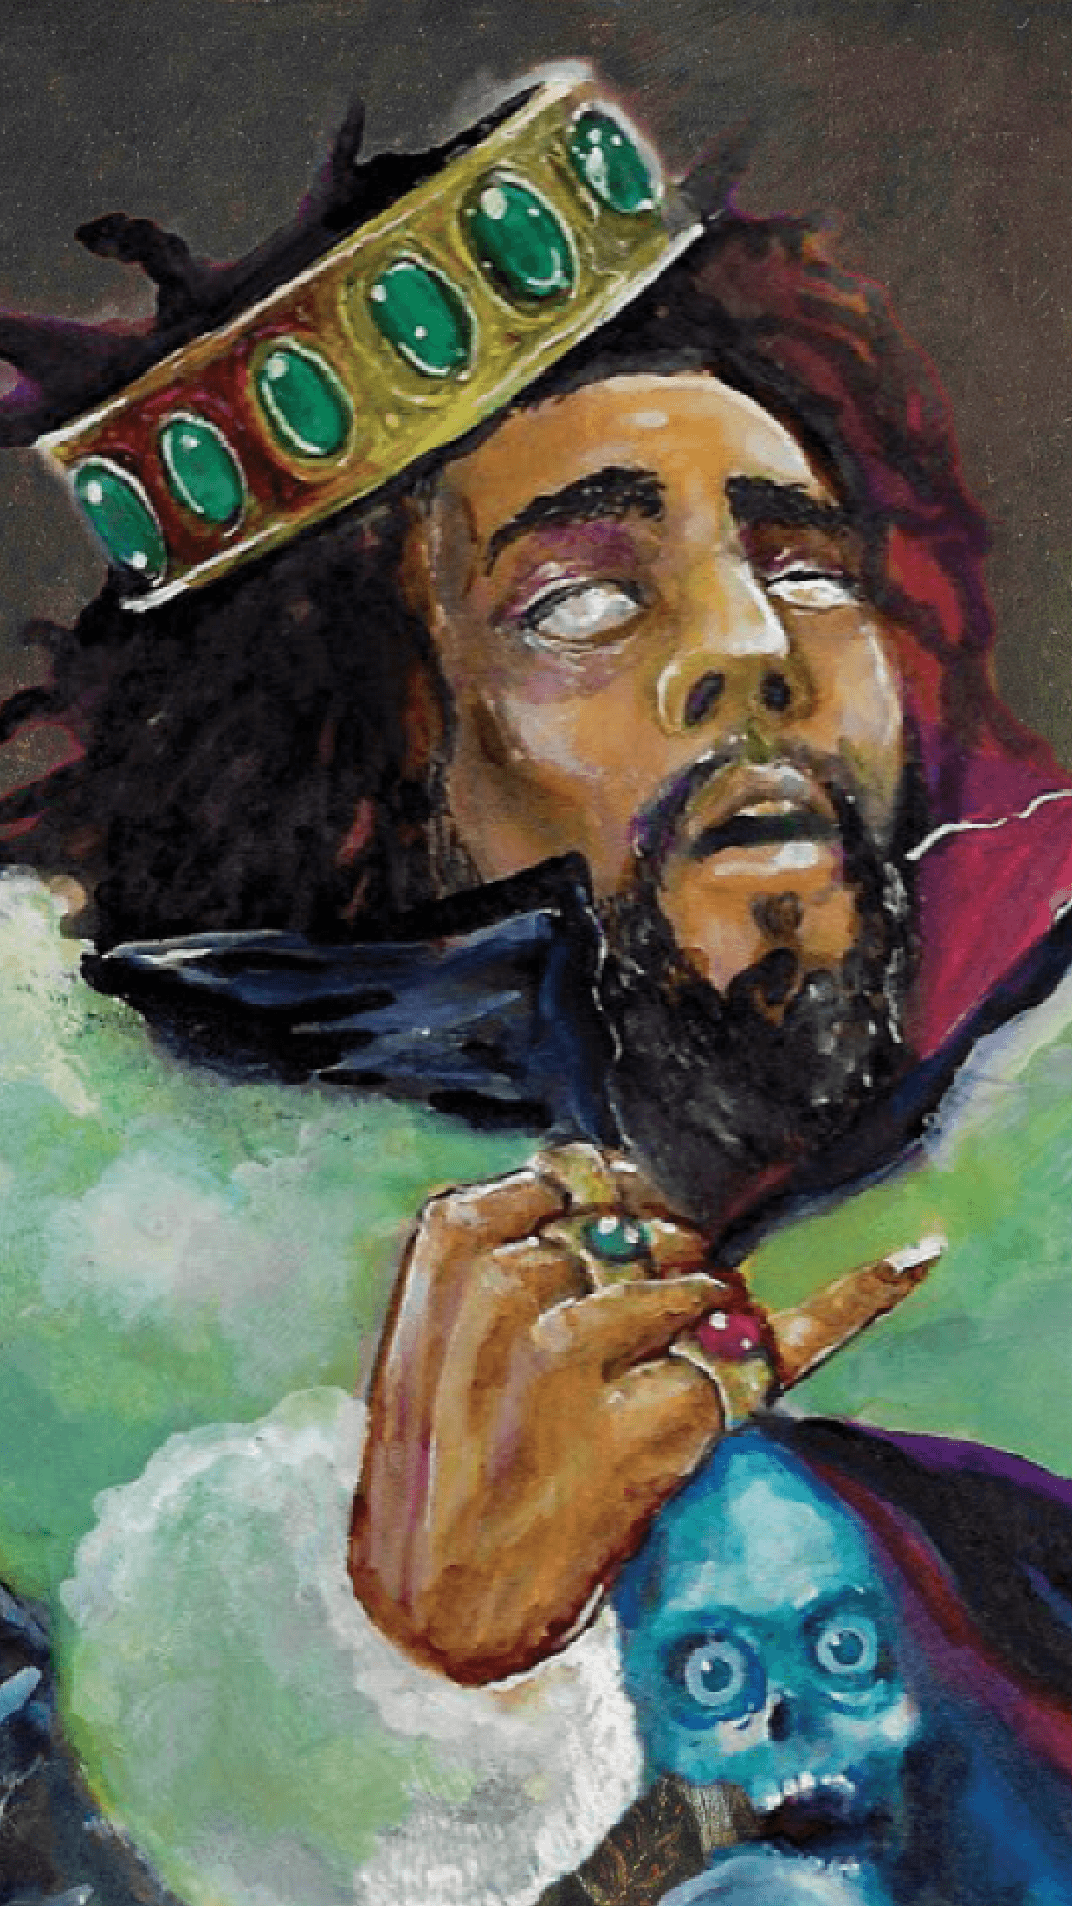 J Cole Album Covers Wallpapers